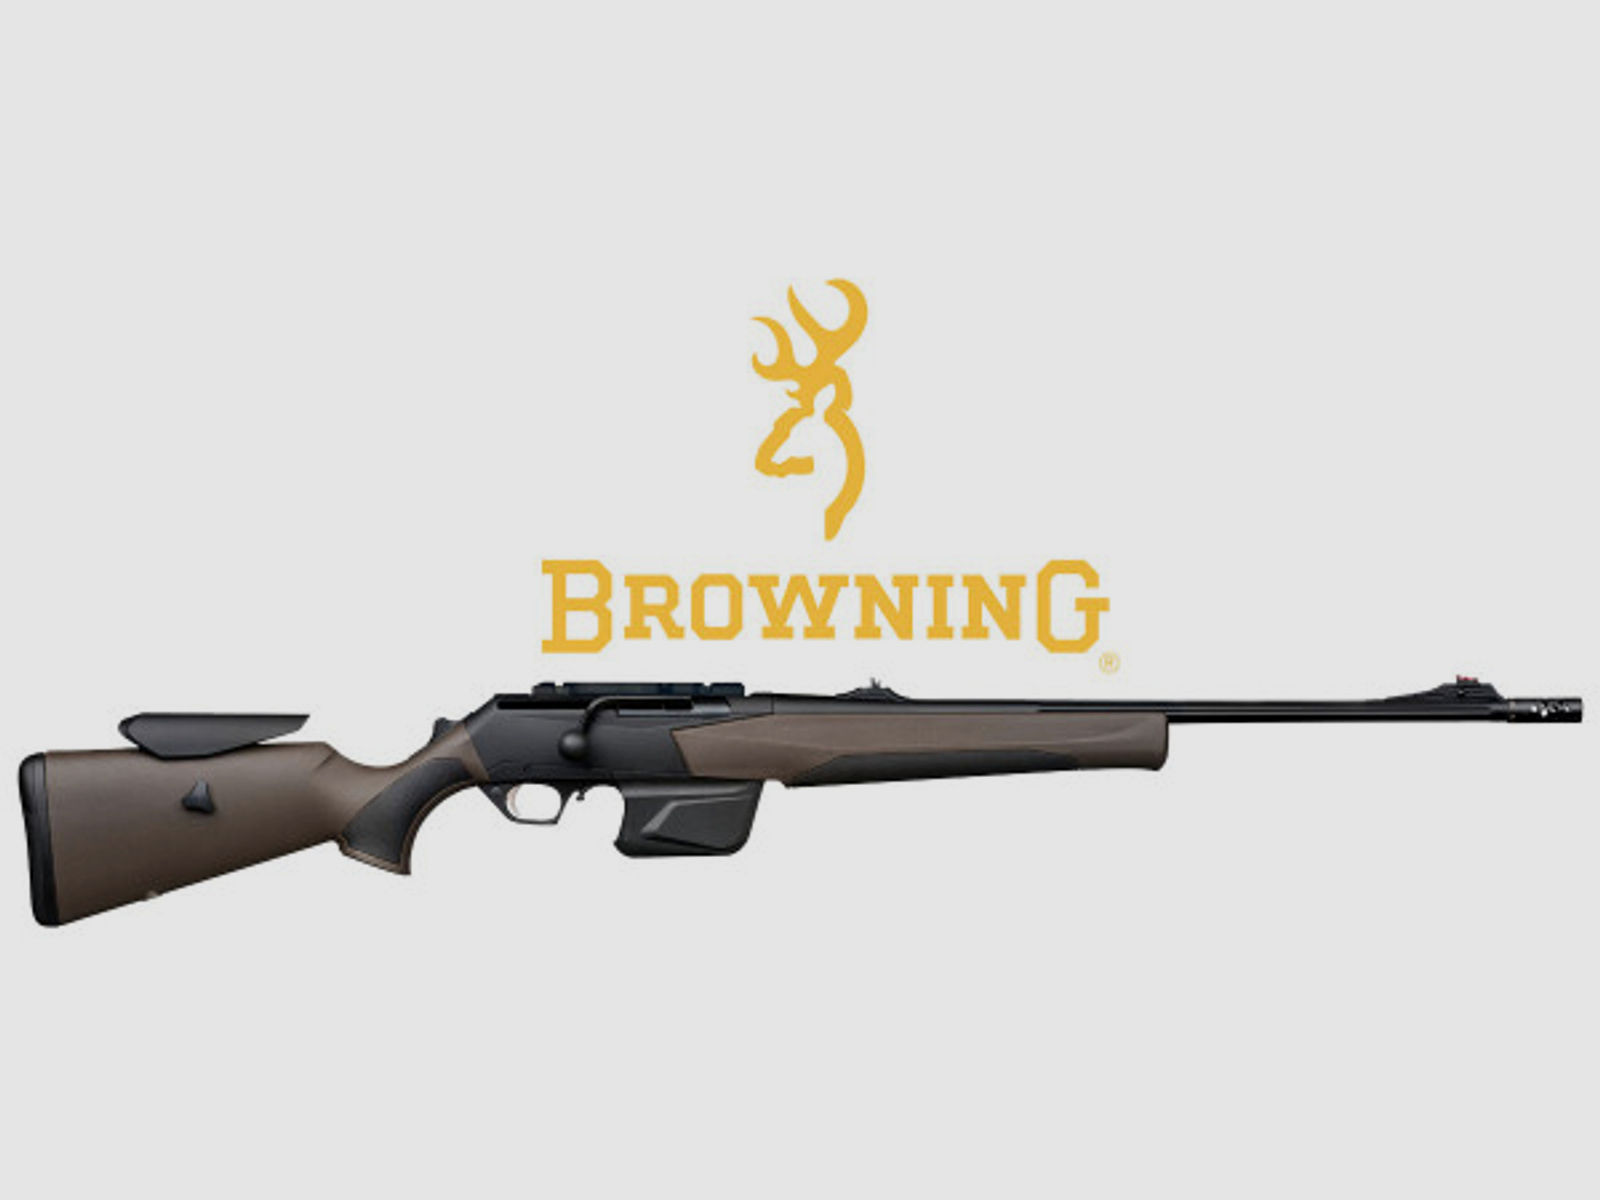 Browning MARAL COMPOSITE BROWN HC ADJUSTABLE .30-06 Springfield Repetierbüchse